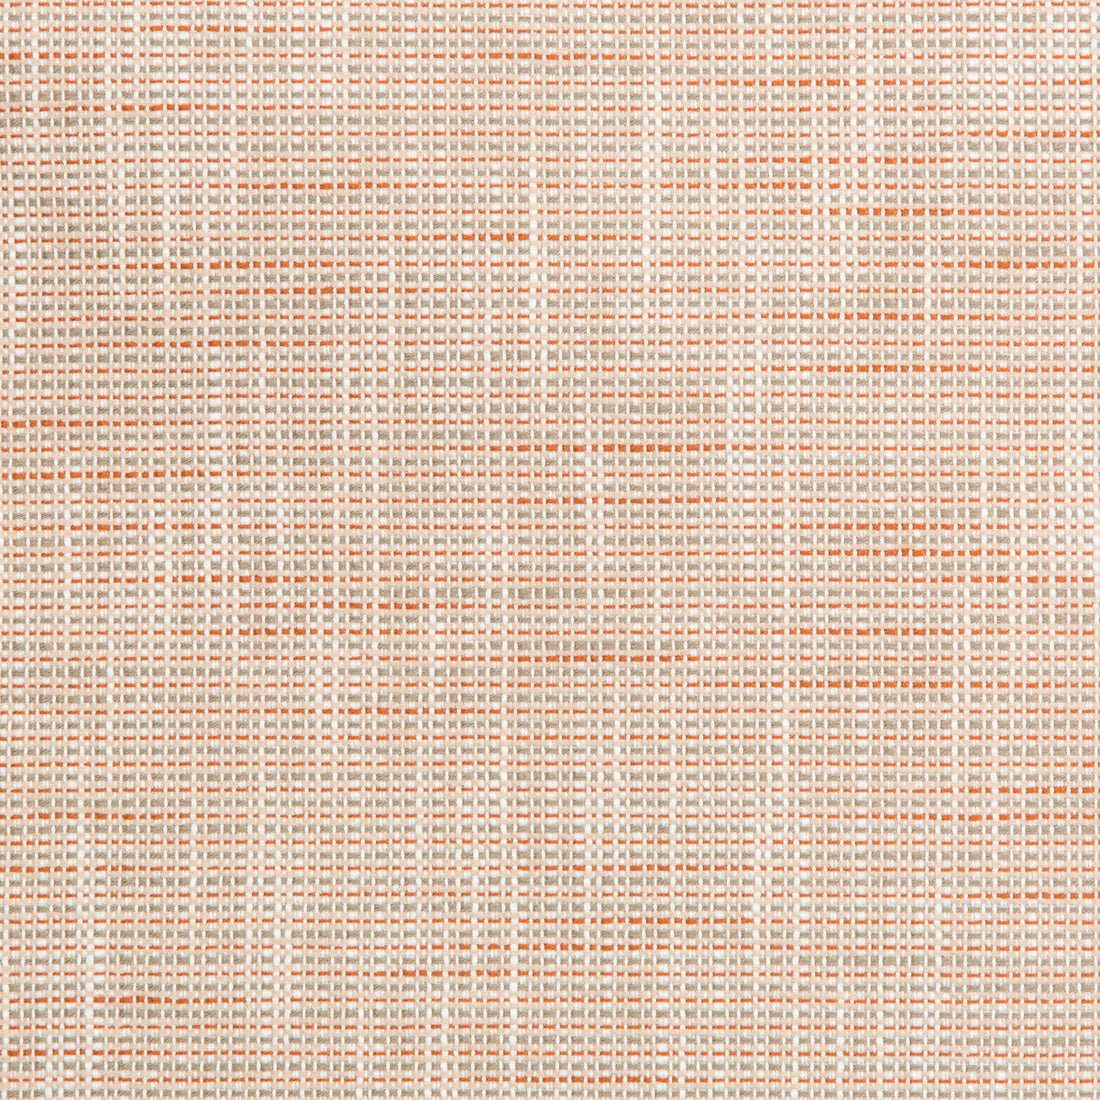 River Park fabric in nutmeg color - pattern 35866.1124.0 - by Kravet Contract in the Gis Crypton collection